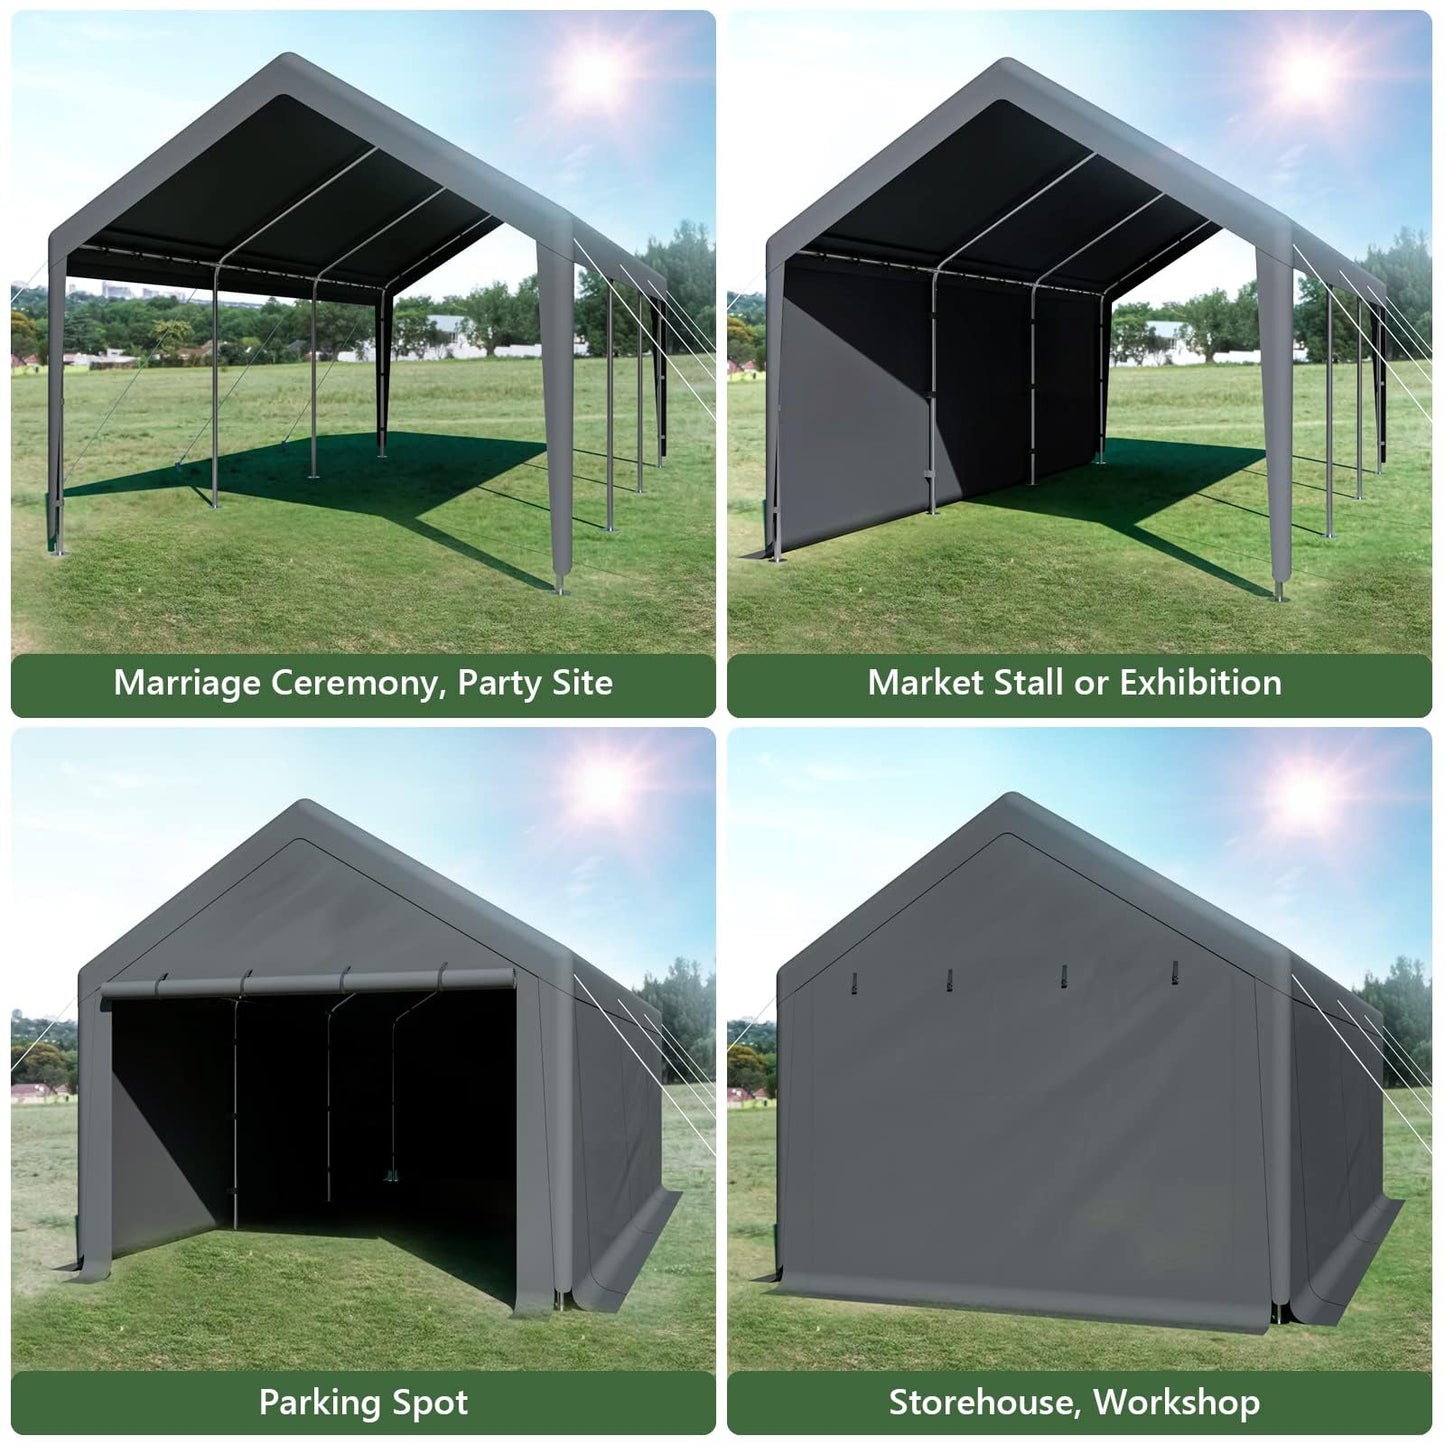 Outdoor Carport 10x20ft Heavy Duty Canopy Storage Shed,Portable Garage Party Tent,Portable Garage with Removable Sidewalls & Doors All-Season Tarp